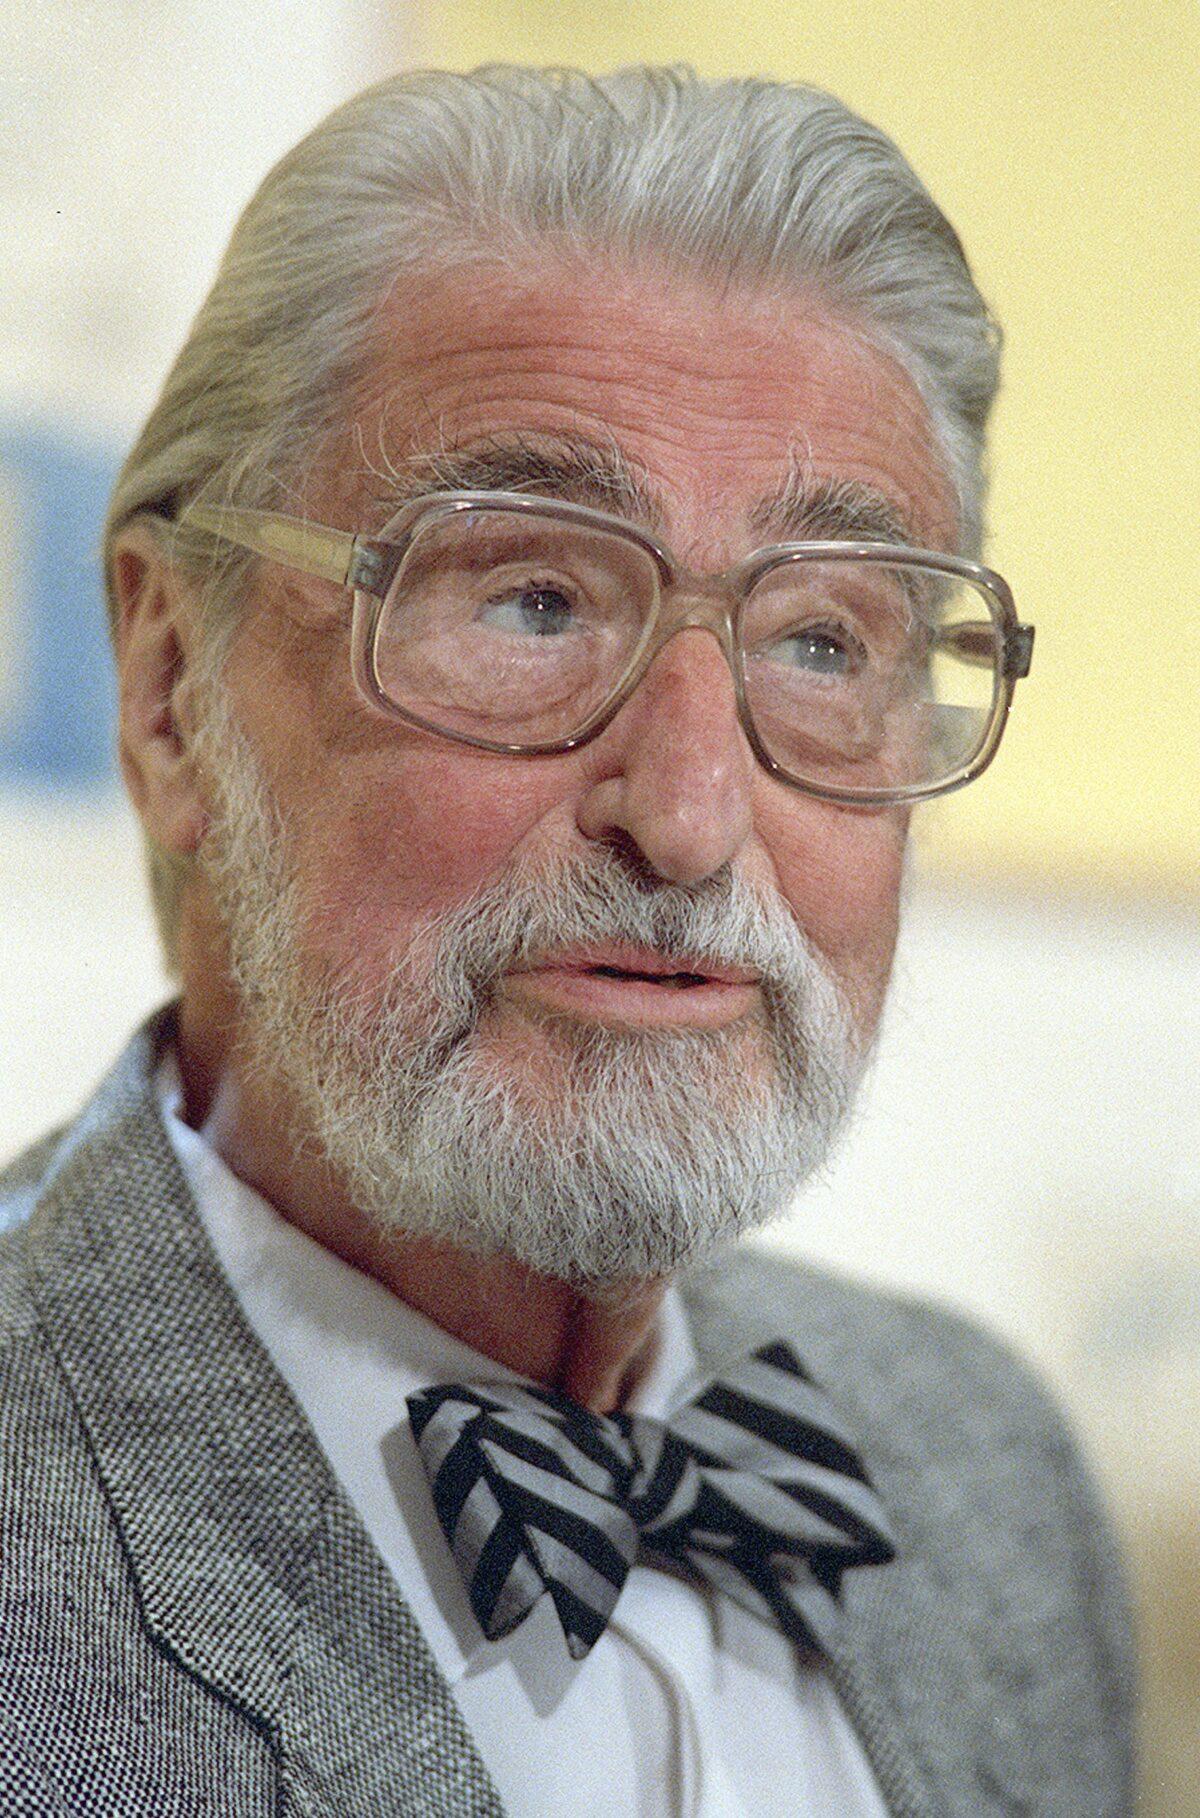 American author, artist and publisher Theodor Seuss Geisel, also known by his pen name Dr. Seuss, appears at an event in Dallas on April 3, 1987. (AP Photo)